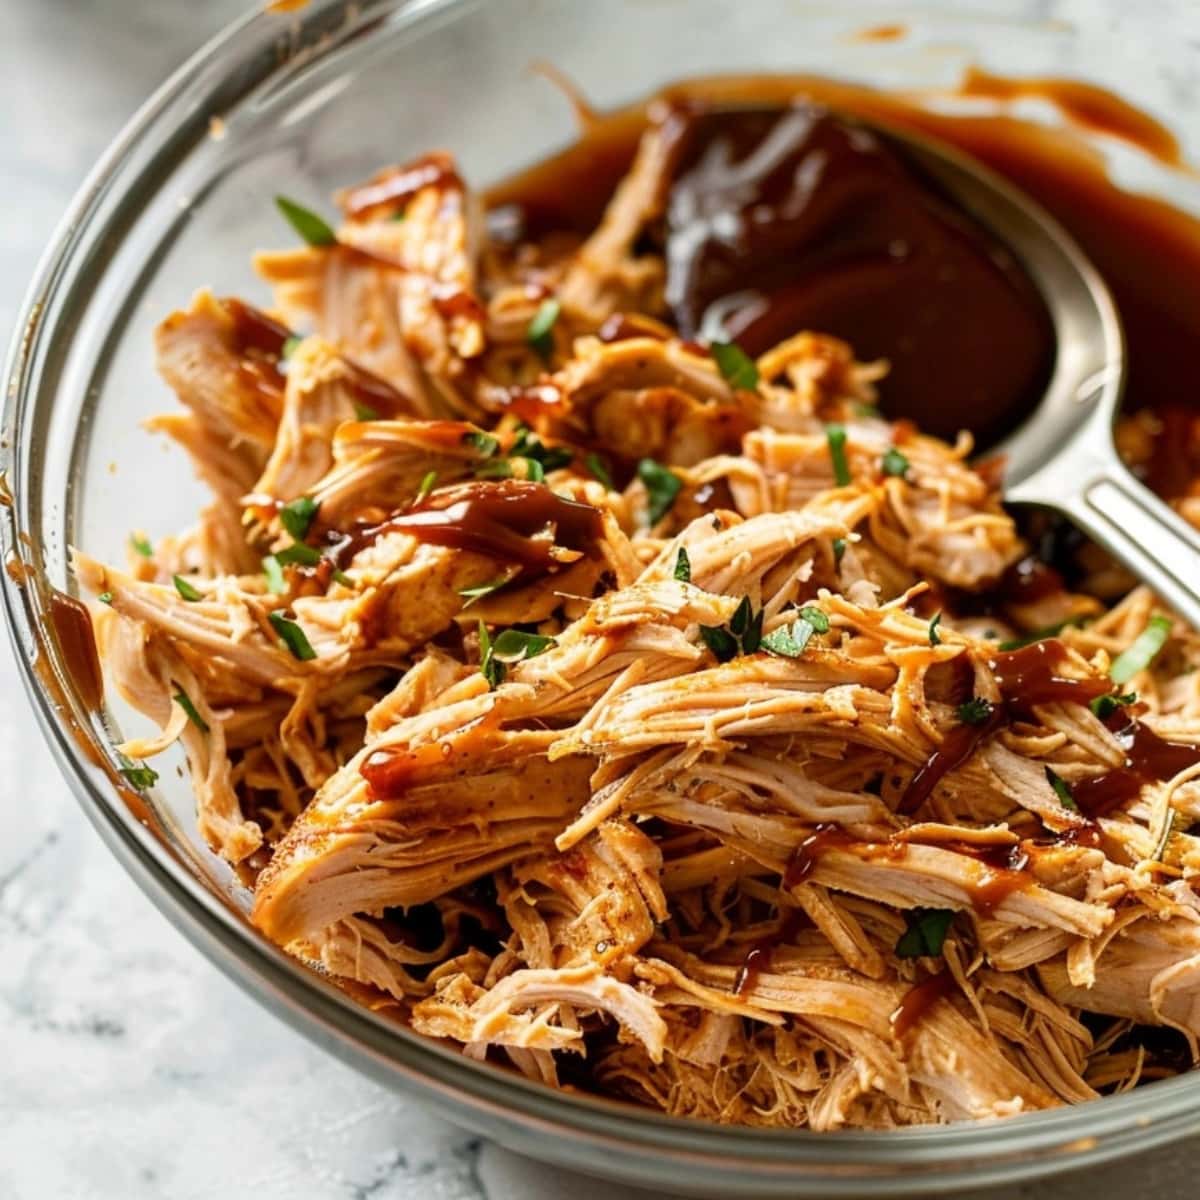 Shredded chicken with spoonful of bbq sauce on a clear glass bowl.